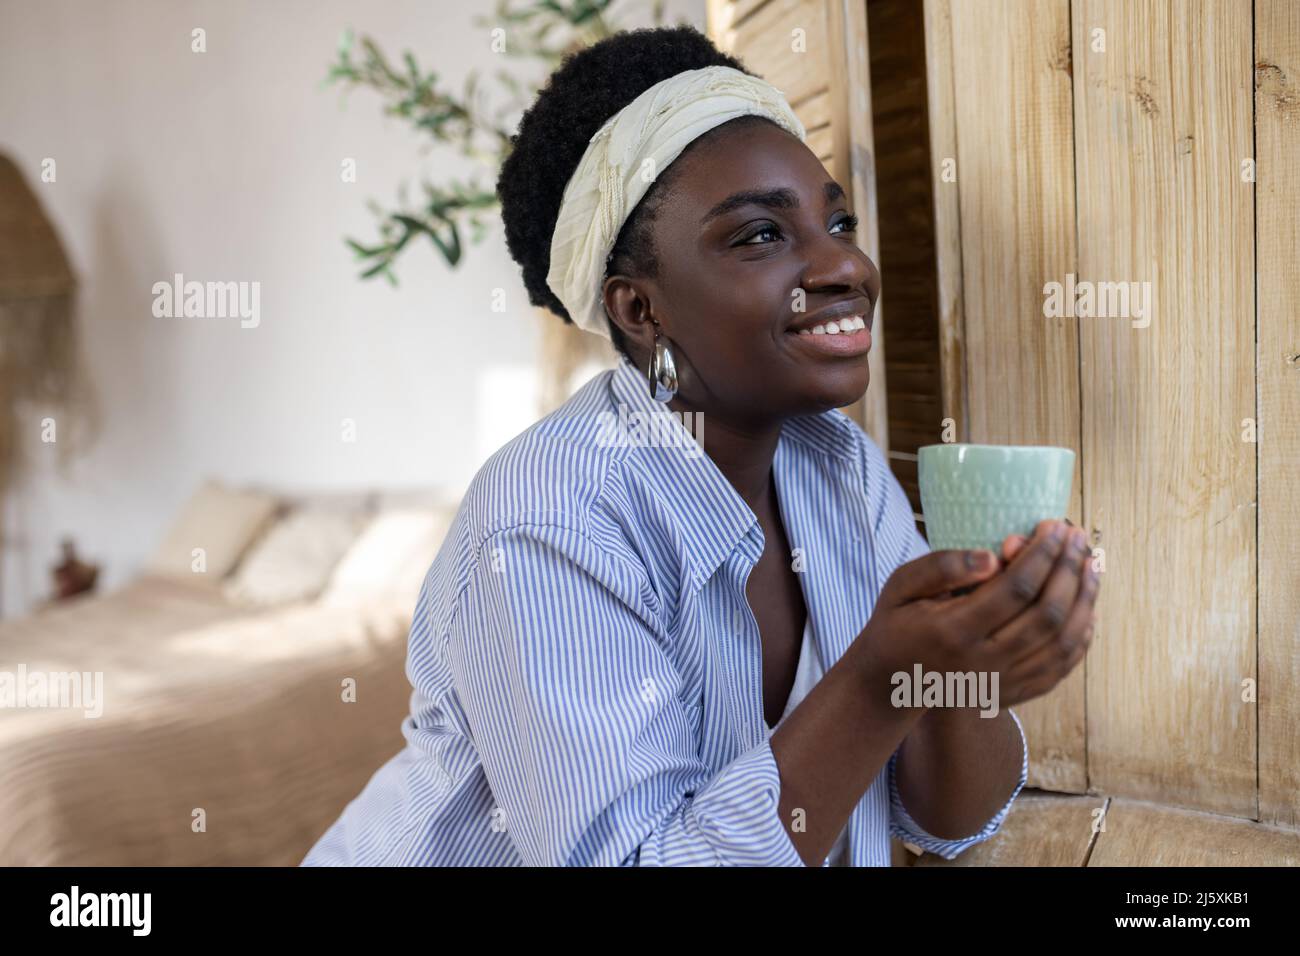 A good-looking african woman in light clothes Stock Photo